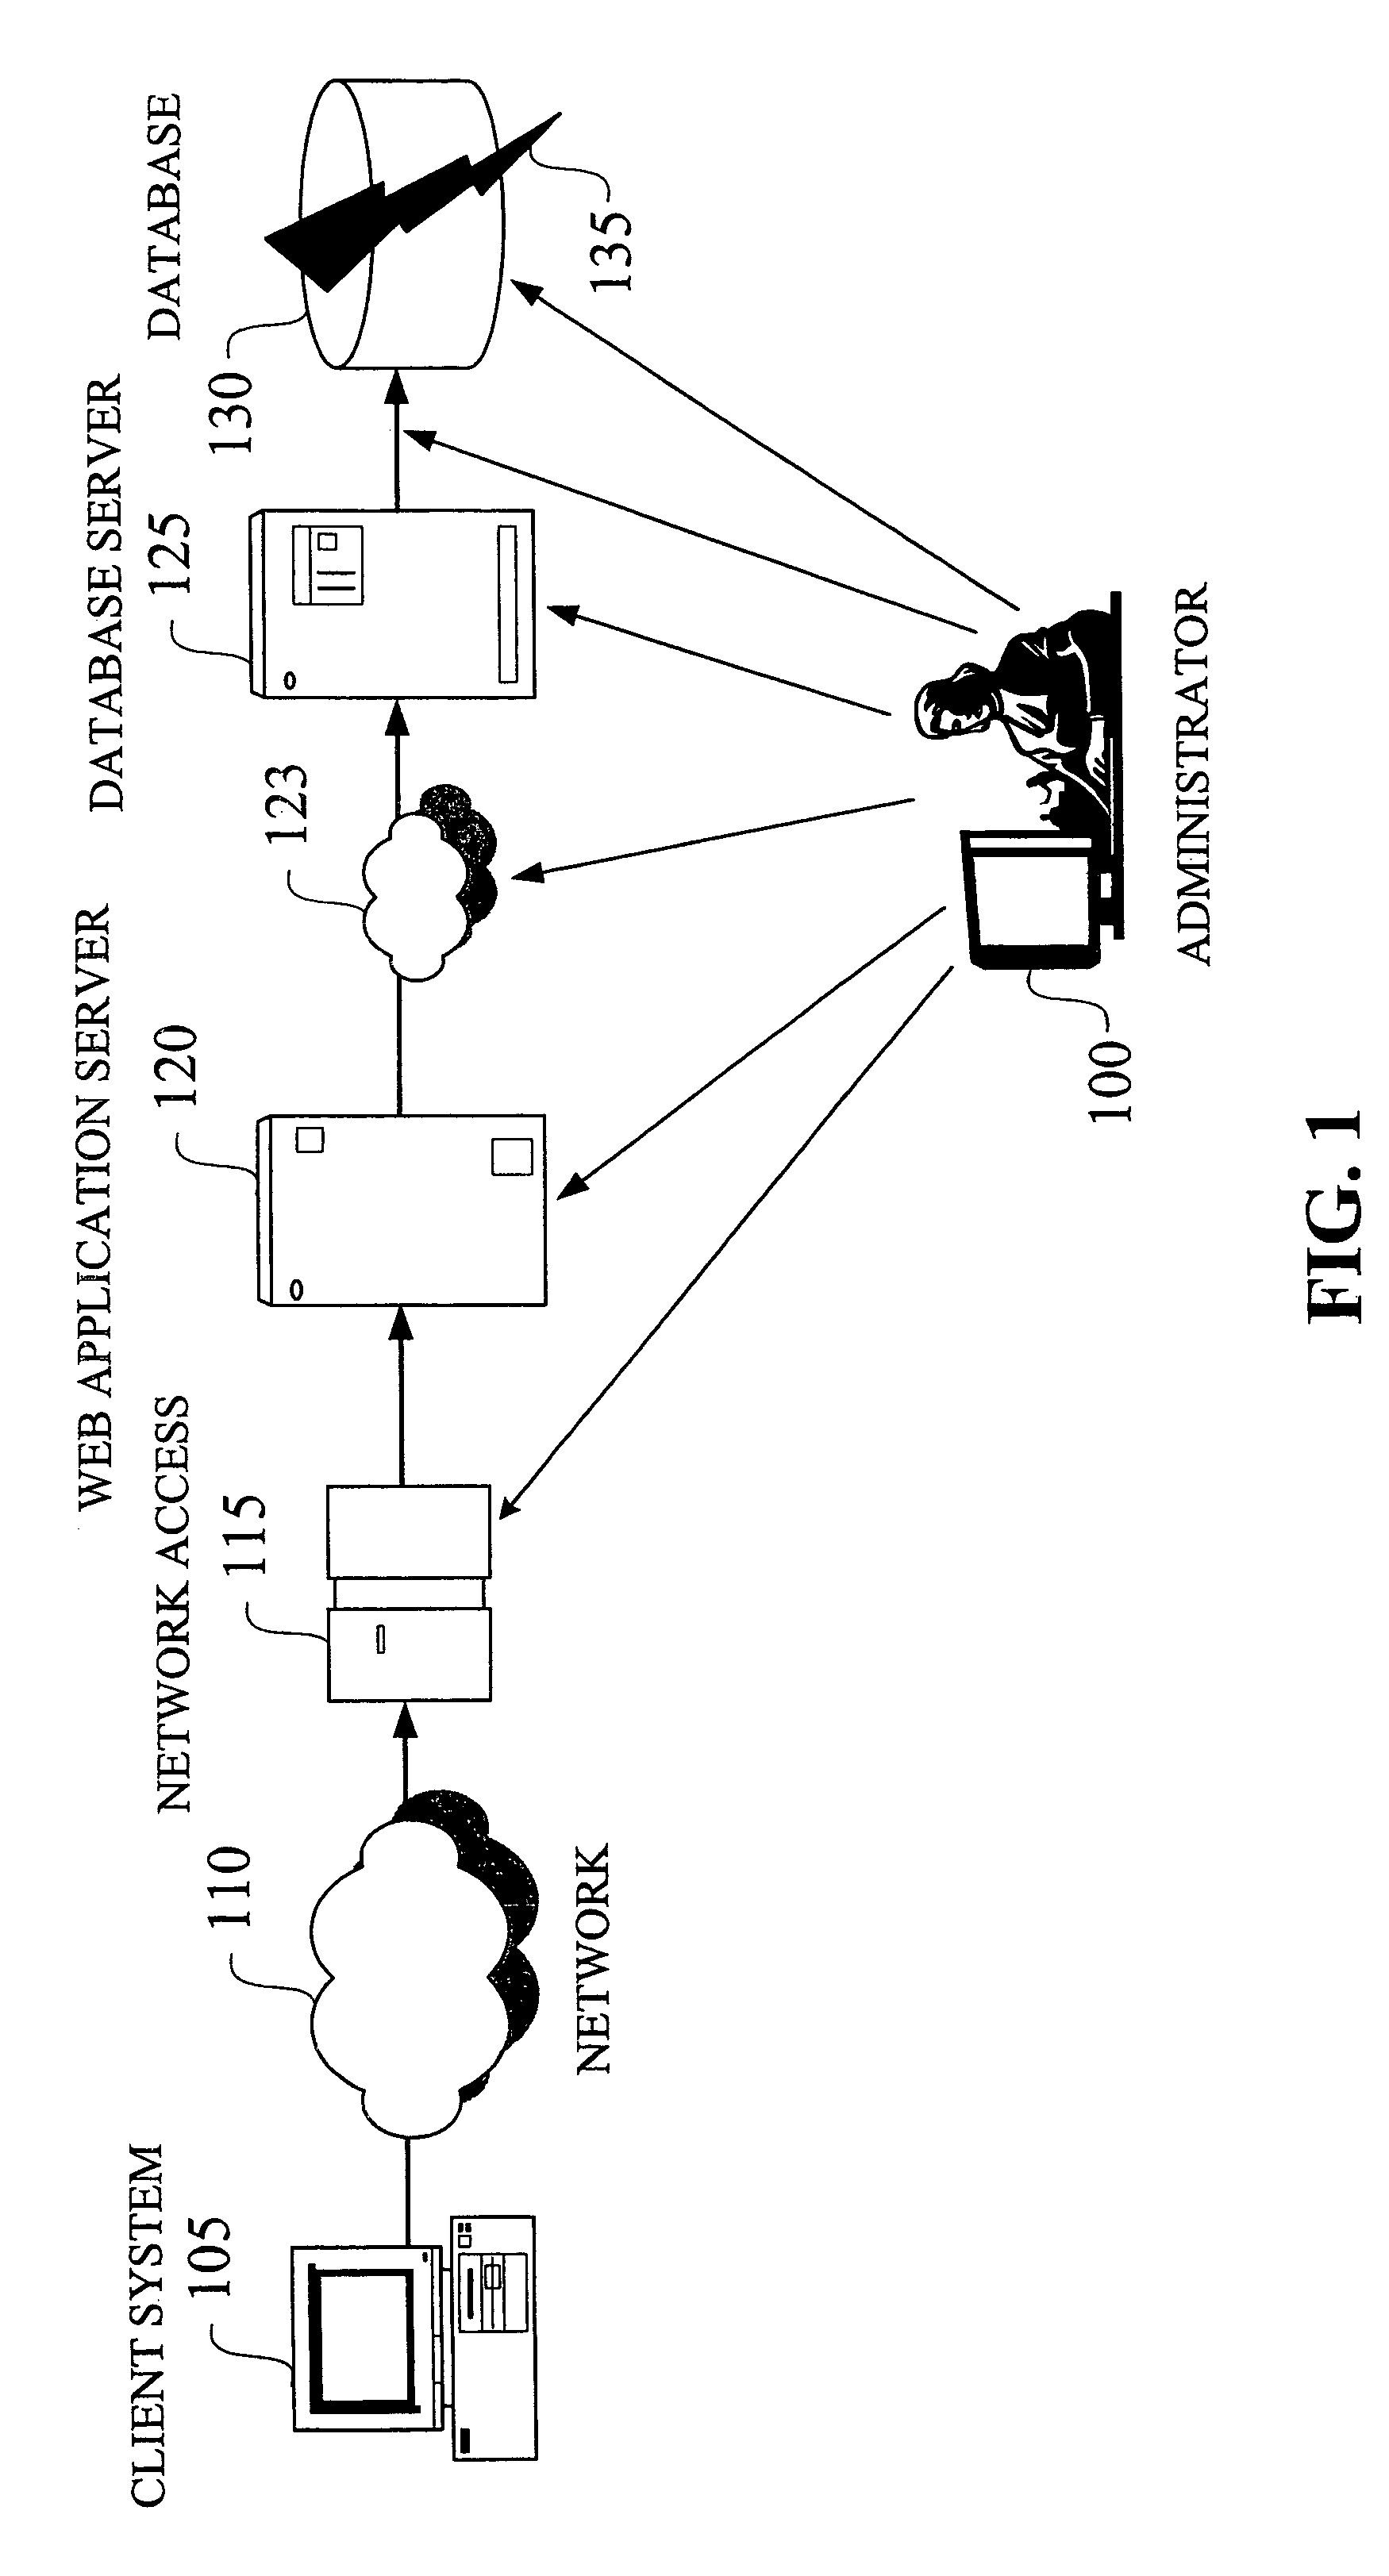 Methods and apparatus for impact analysis and problem determination